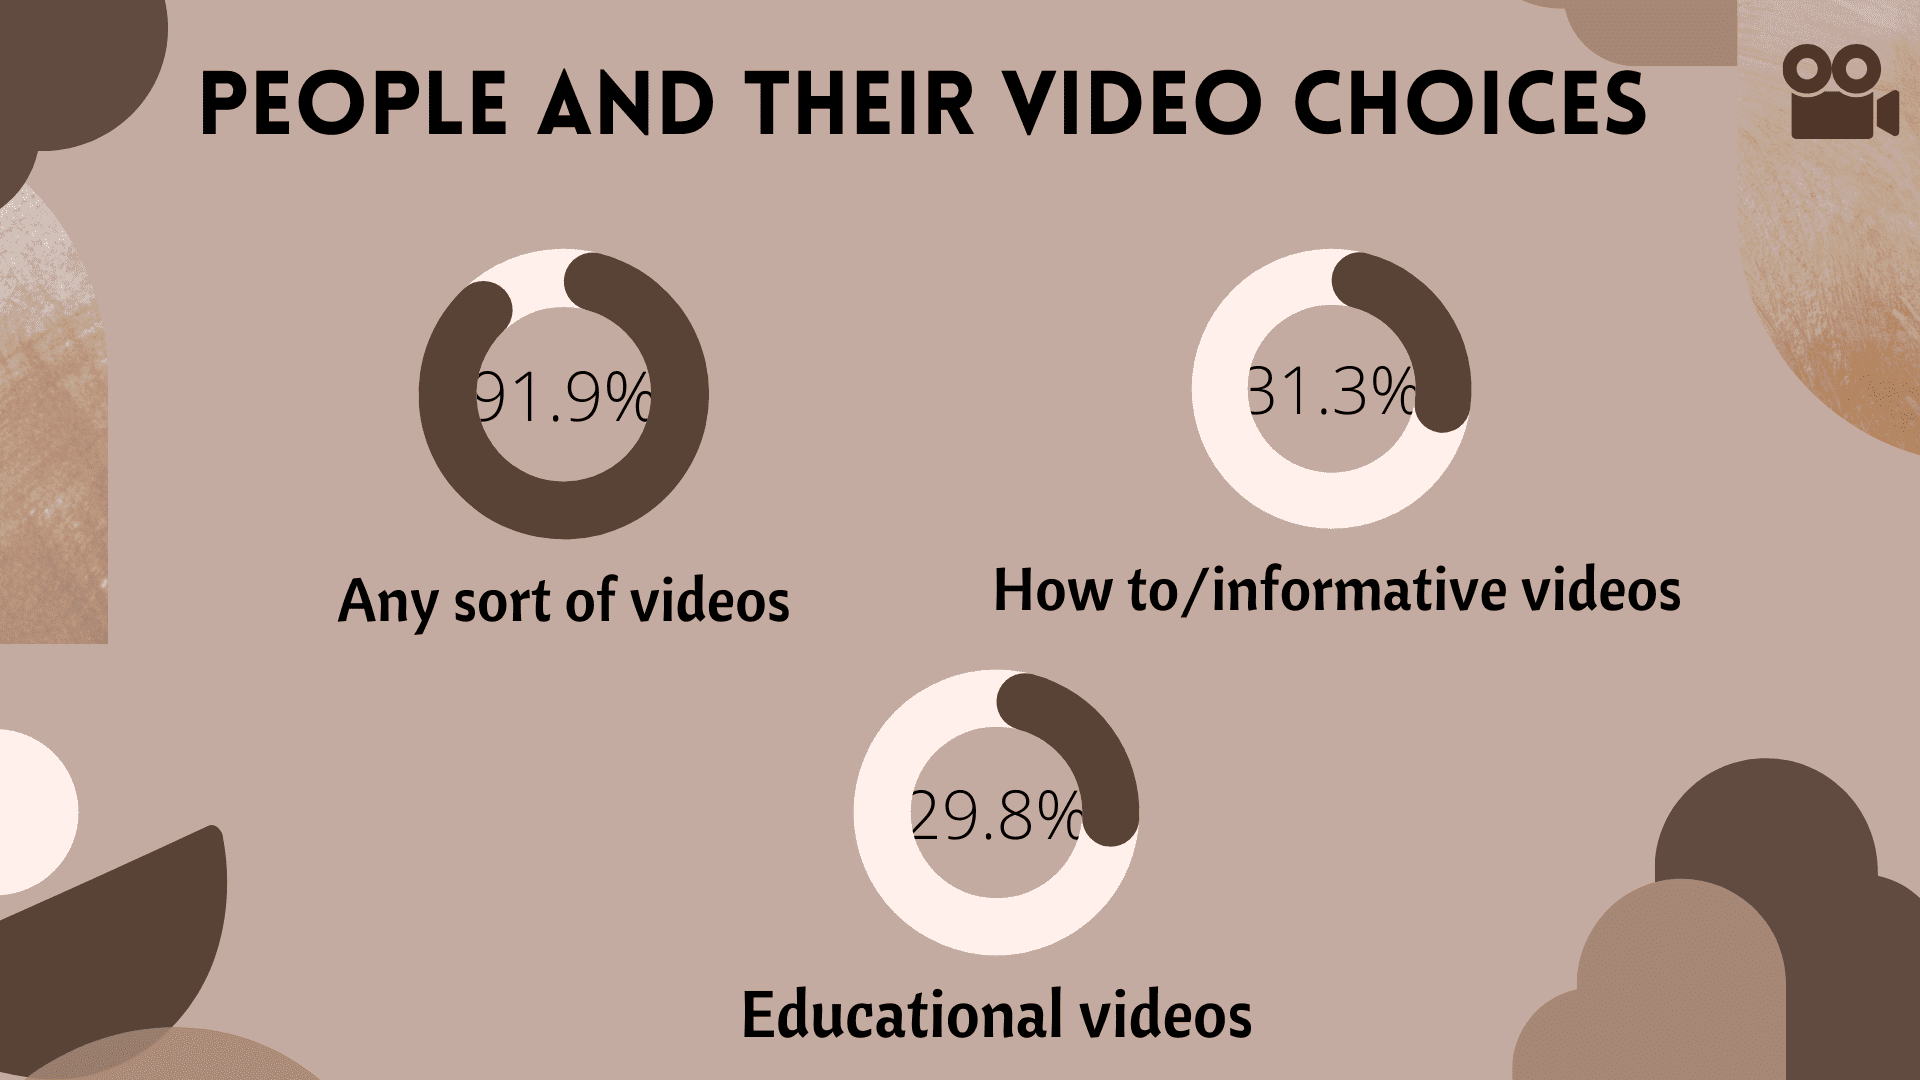 video preferences of people